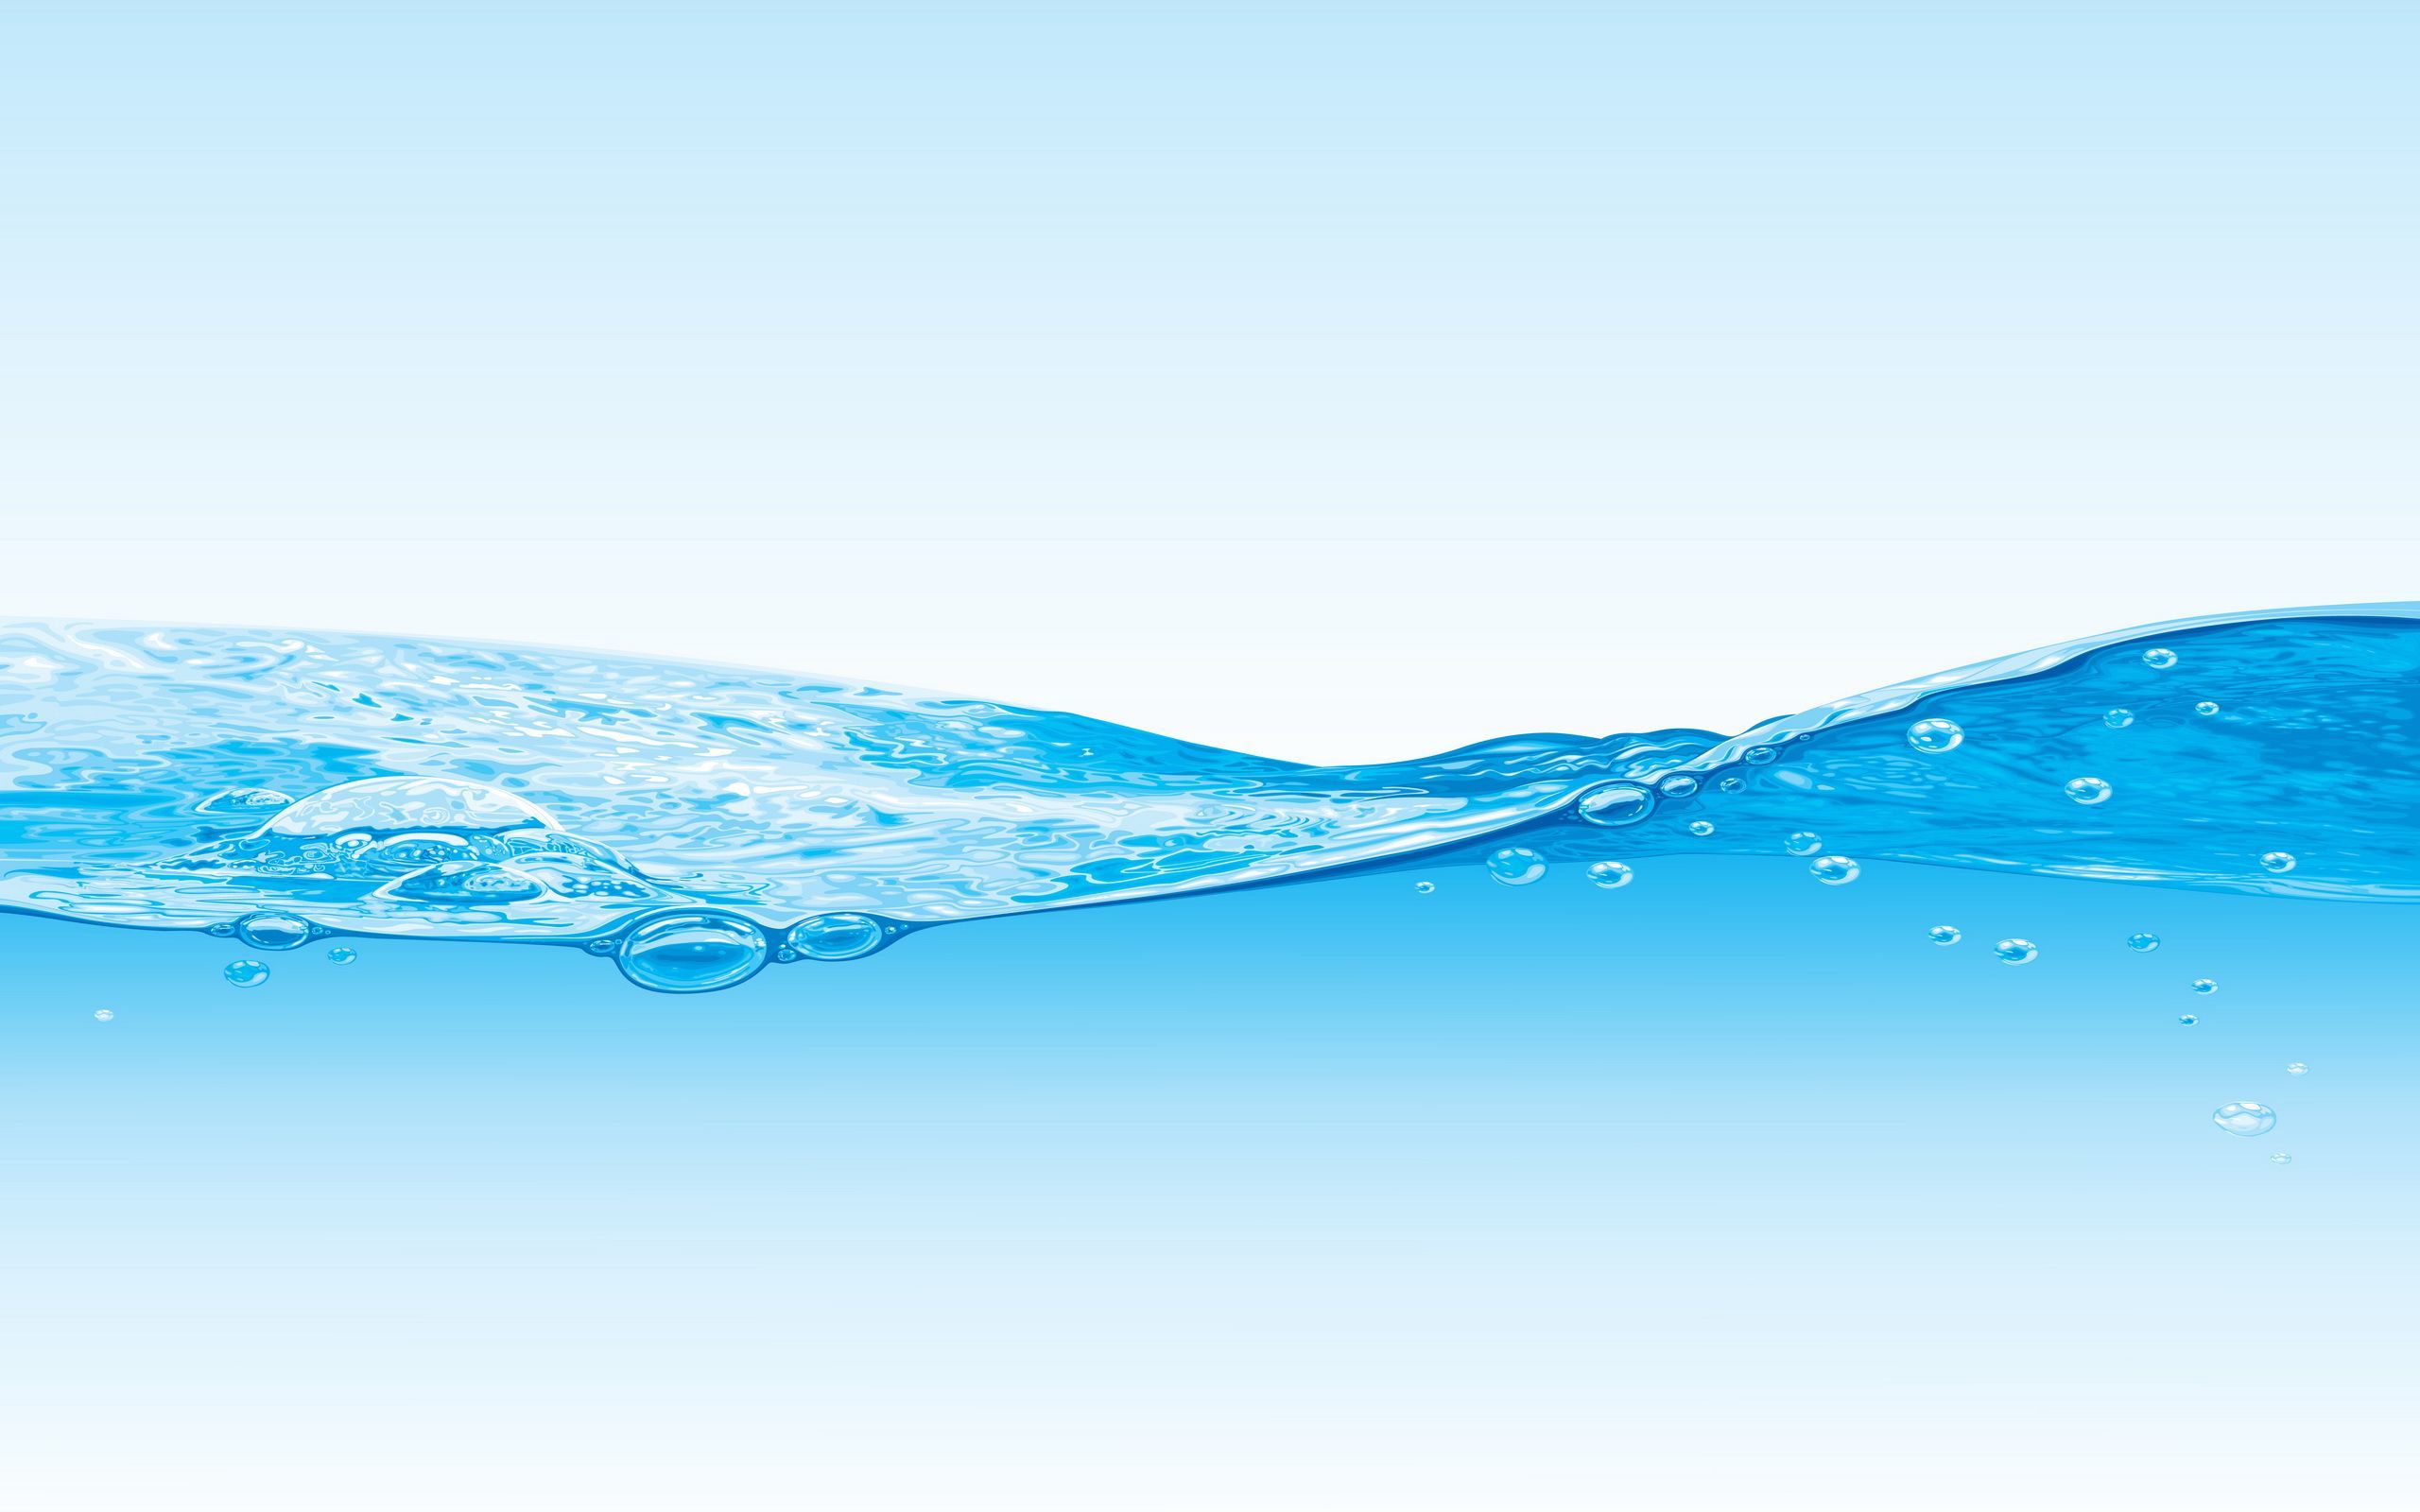 Water Wallpapers 8 - 2560 X 1600 | stmed.net